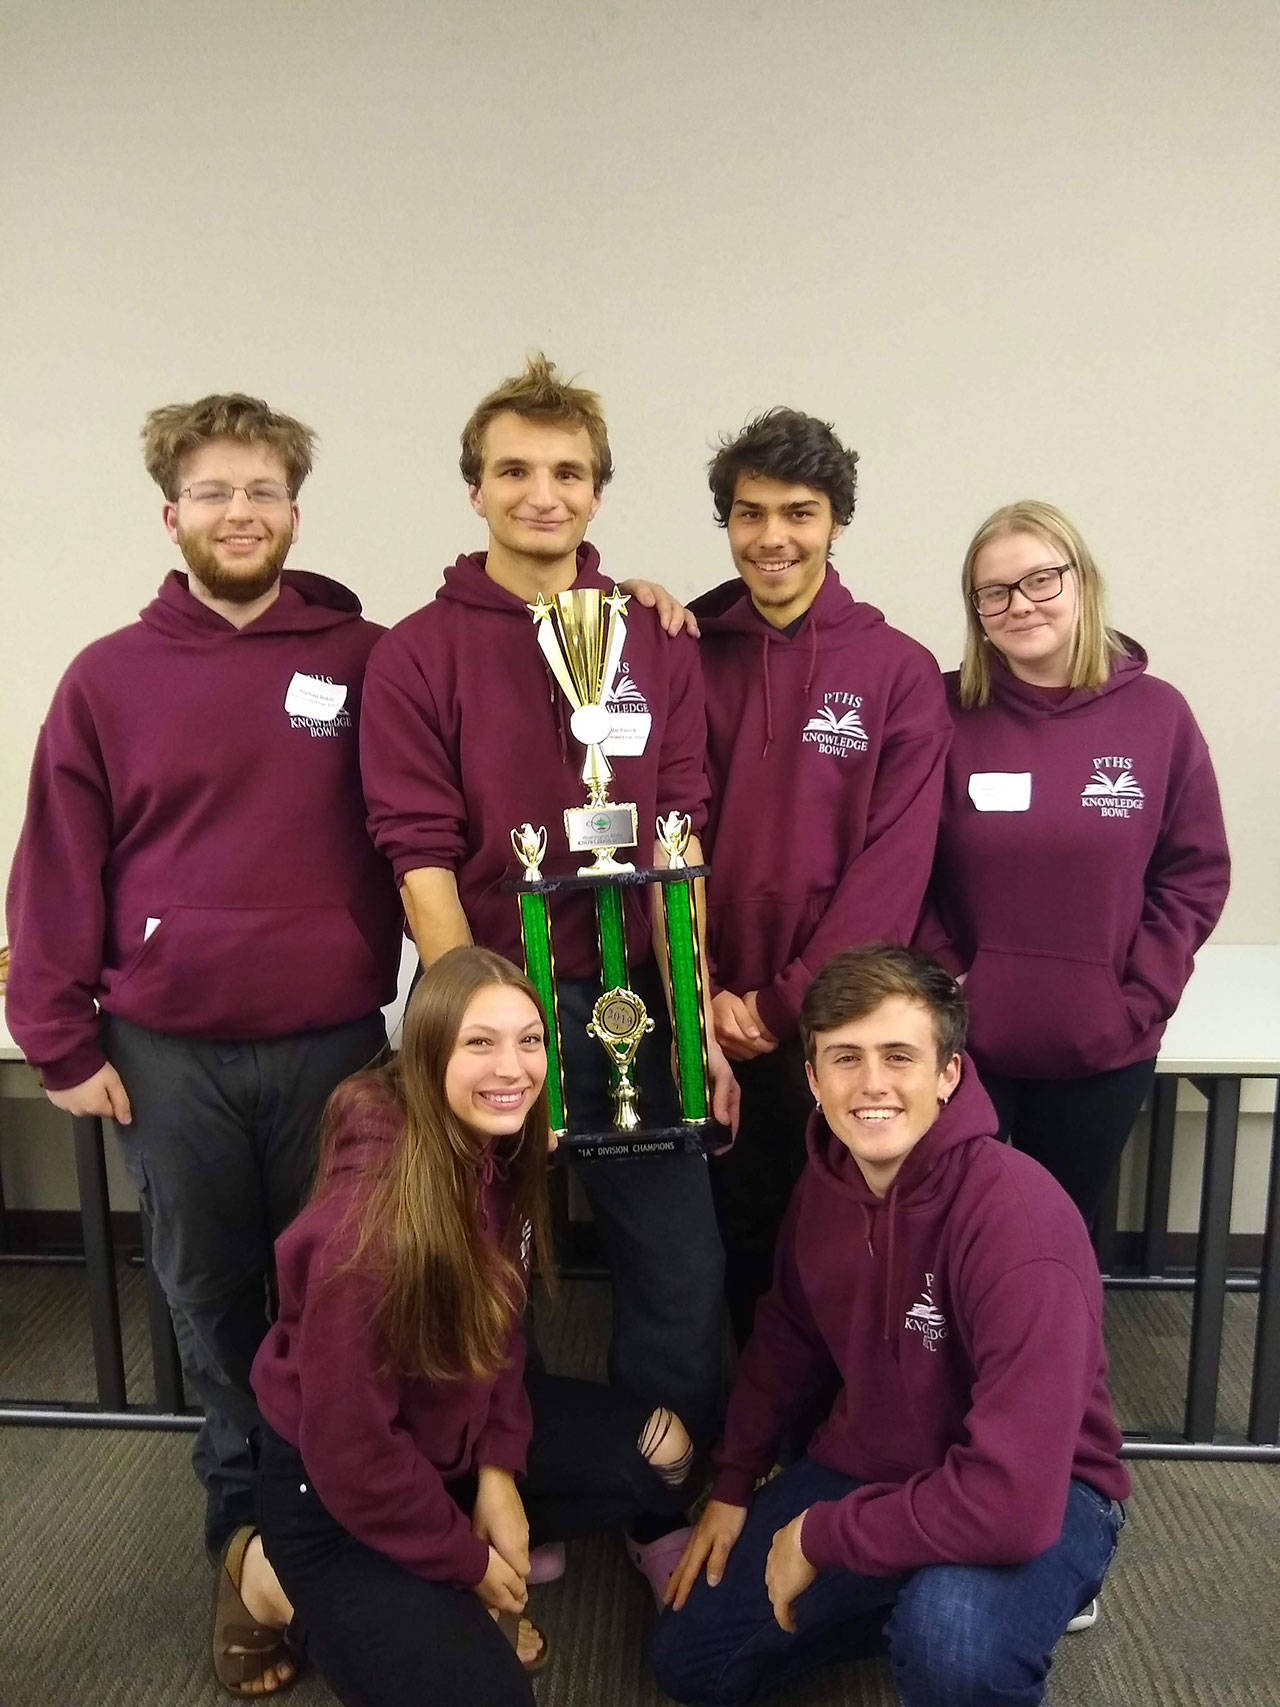 Pictured with their trophy are team members, back row, from left, Raphael Bakin, Gabe Petrick, Lou Babik and Karen Absher, and, front row, from left, Jules Short and Henry Stier. Not pictured are coaches Ben and Julianne Dow.